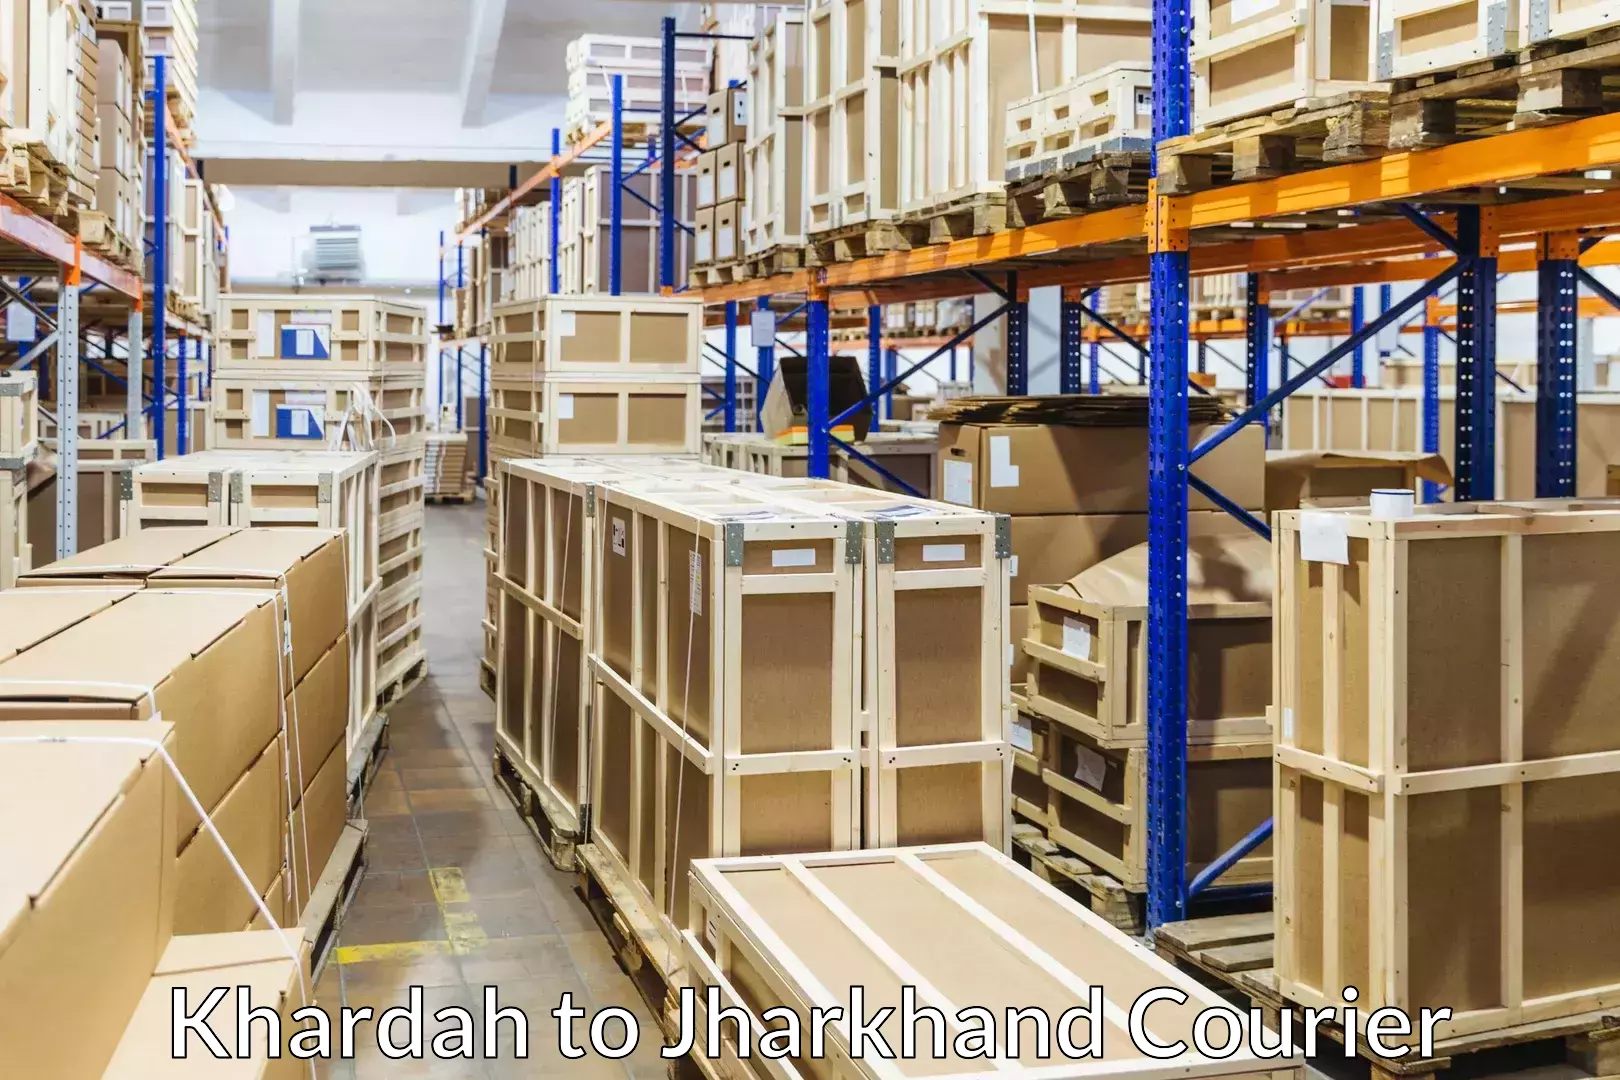 Furniture moving experts Khardah to Jharkhand